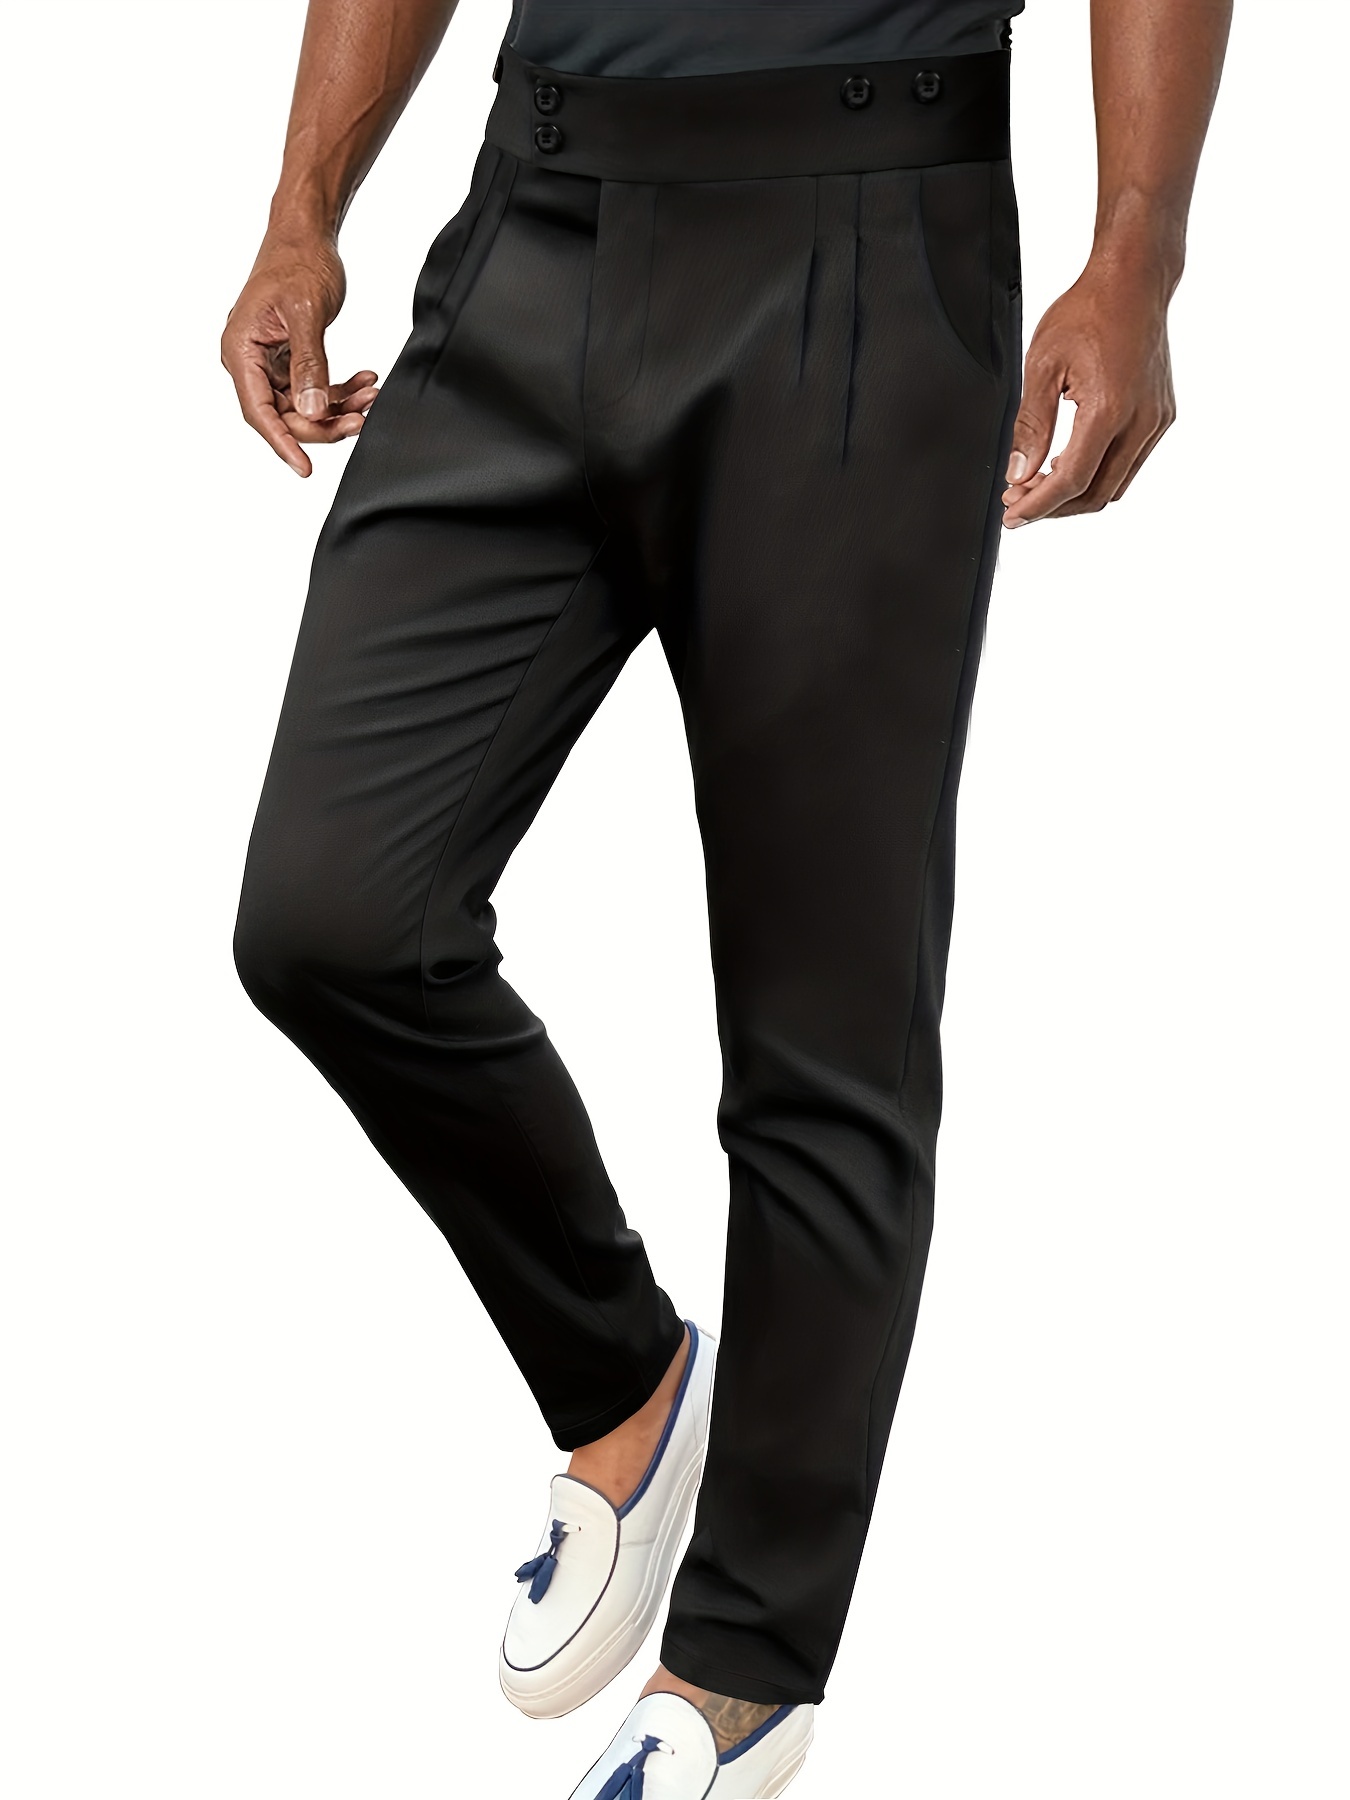 Buy Black Slim Fit Dress Pants by GentWith.com with Free Shipping